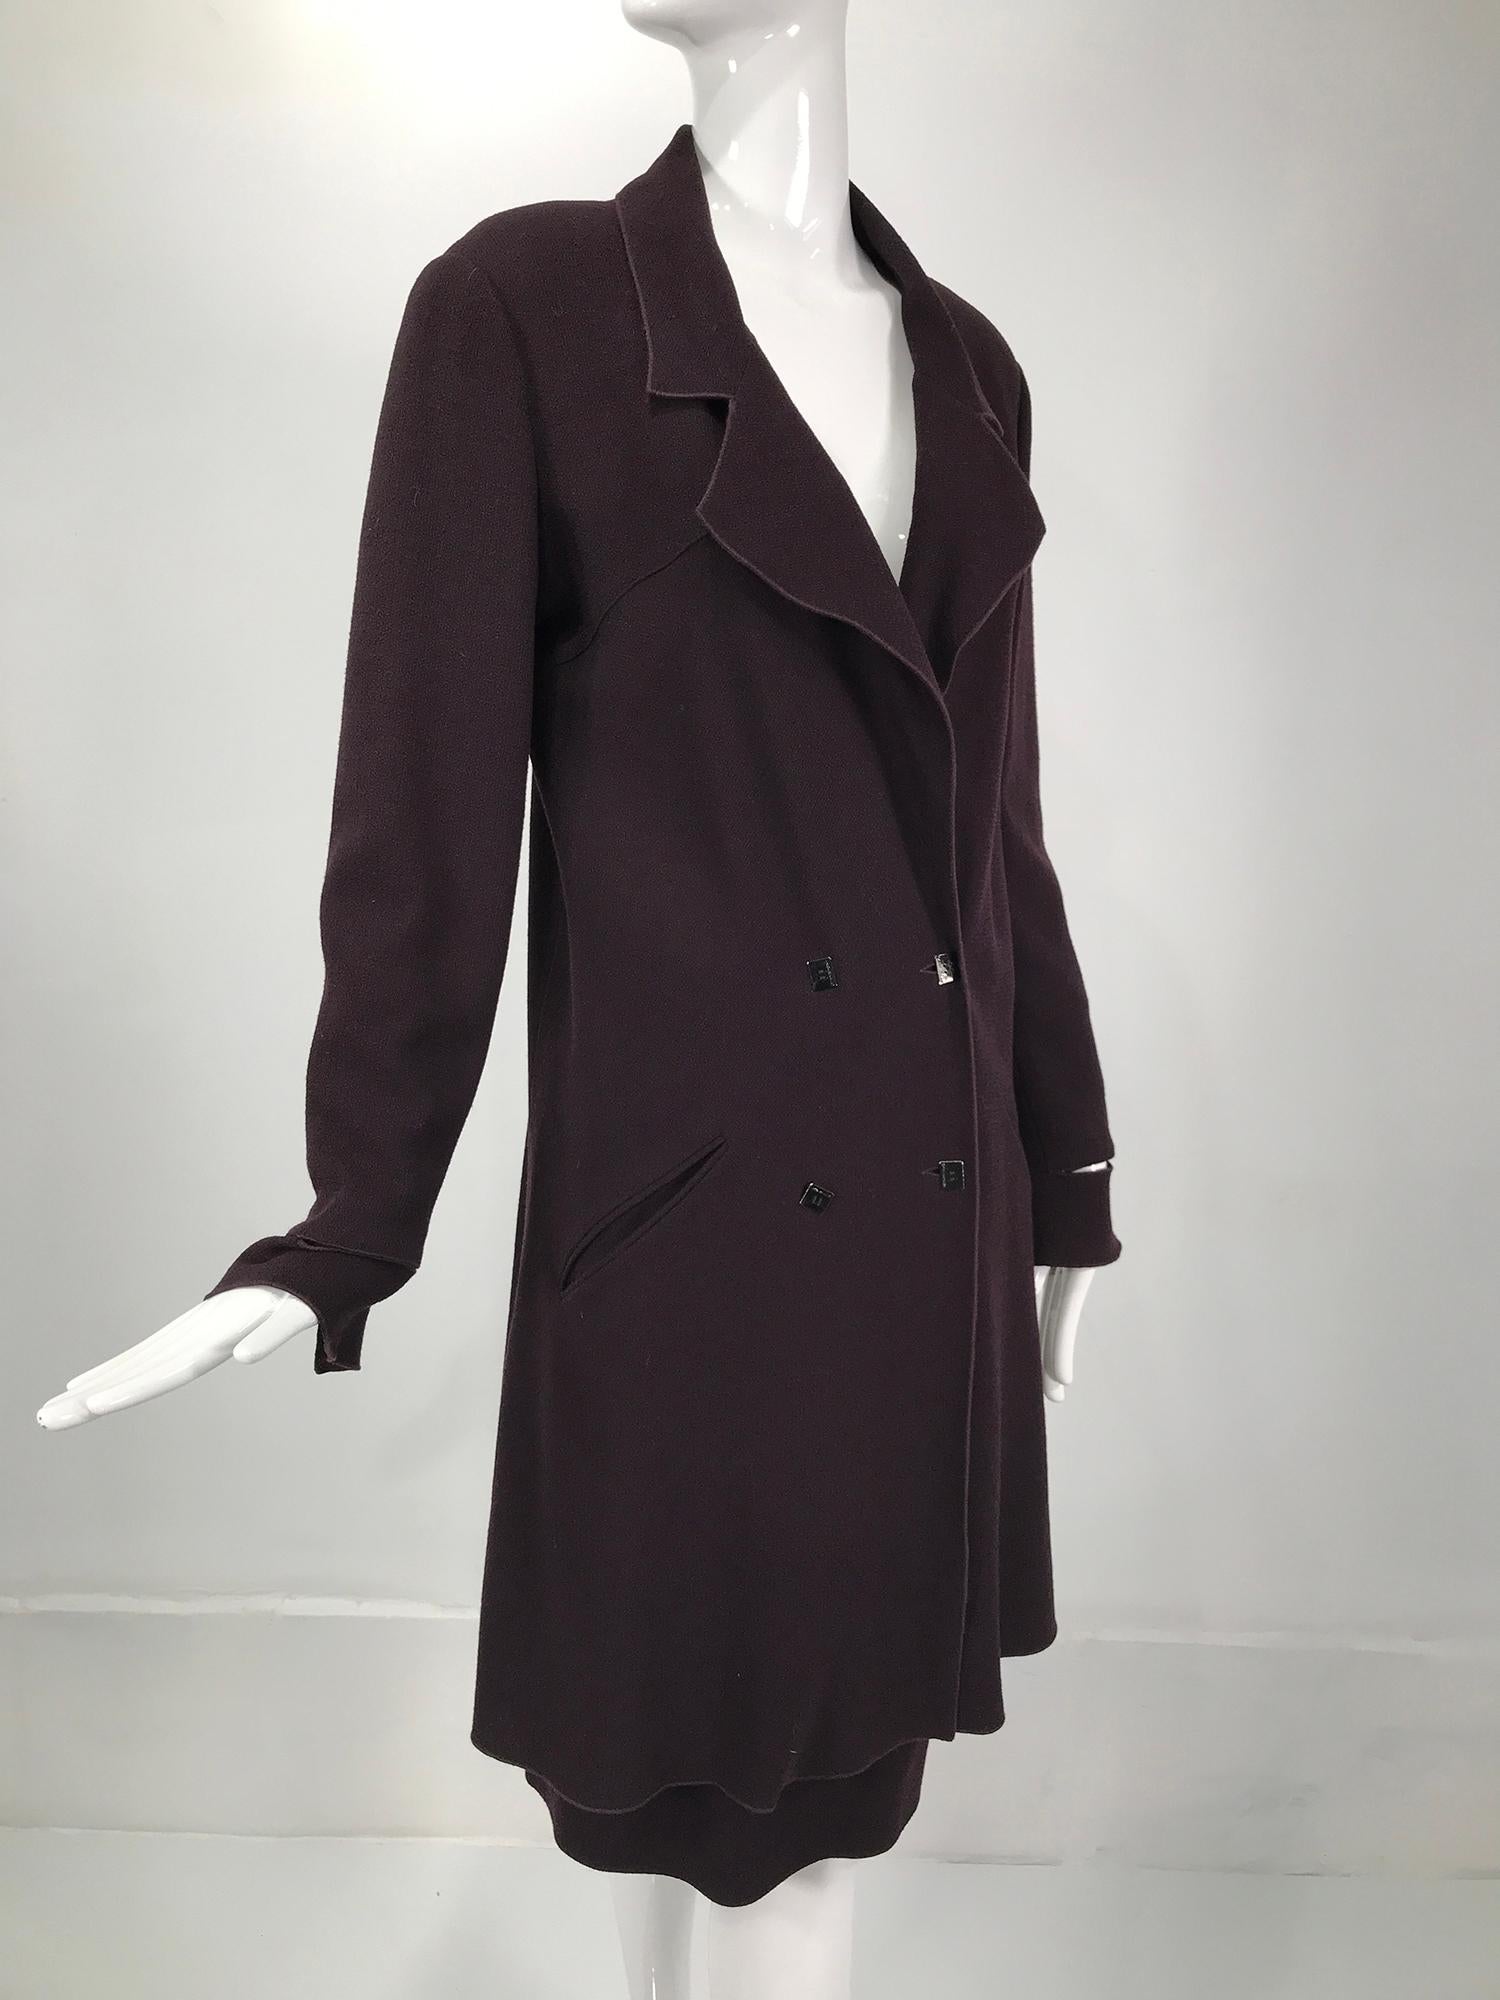 Karl Lagerfeld burgundy wool crepe coat & skirt set from the 1980s. Double breasted coat has notched lapels, serged facings and closes with silver metal logo buttons. All the facings are serged finished. The coat has angled besom hip pockets. The